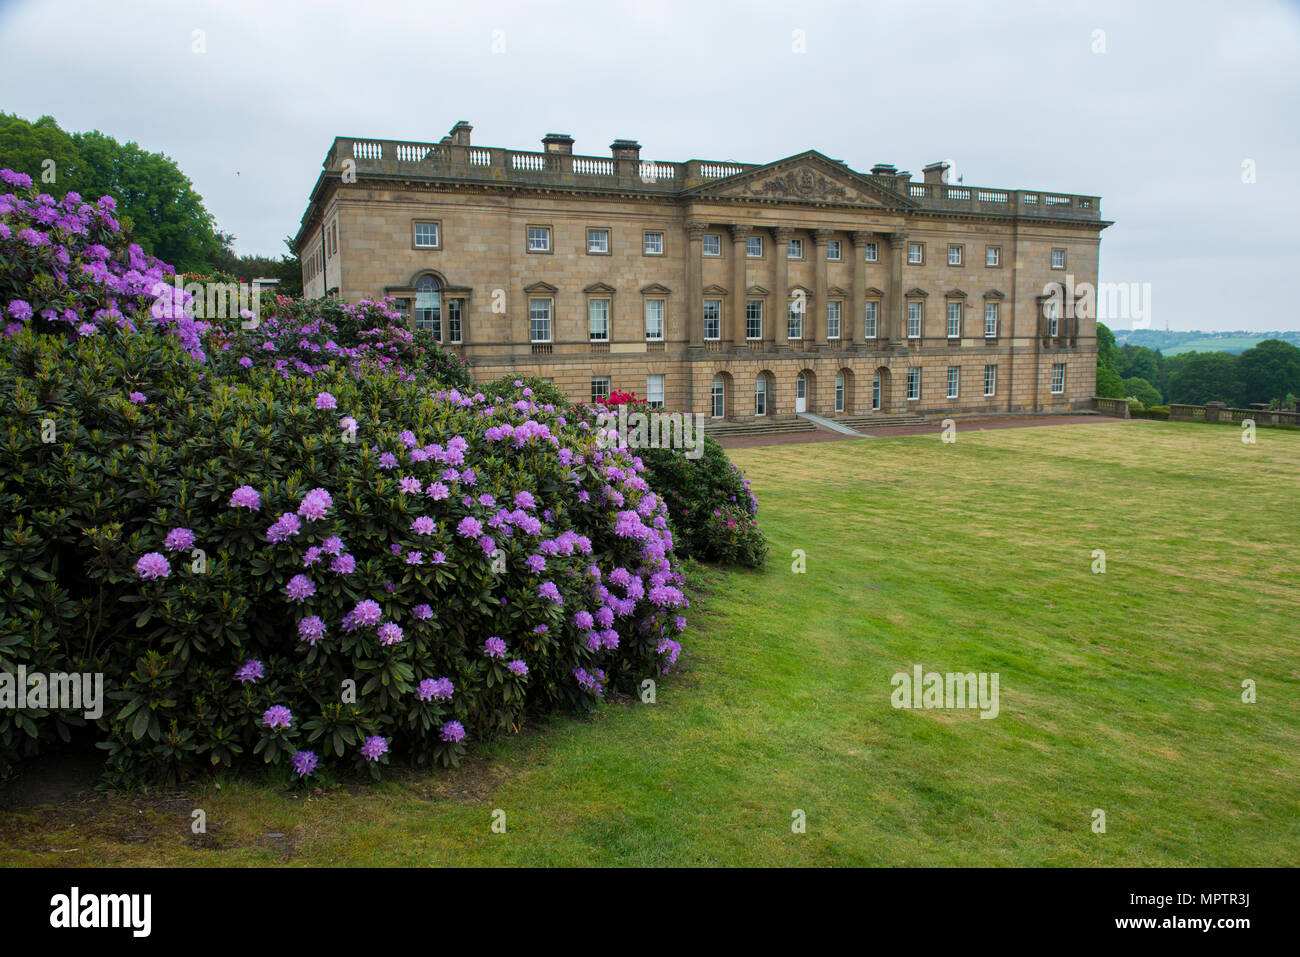 Northern College, Wentworth Castle near Barnsley, South Yorkshire, UK. Stock Photo